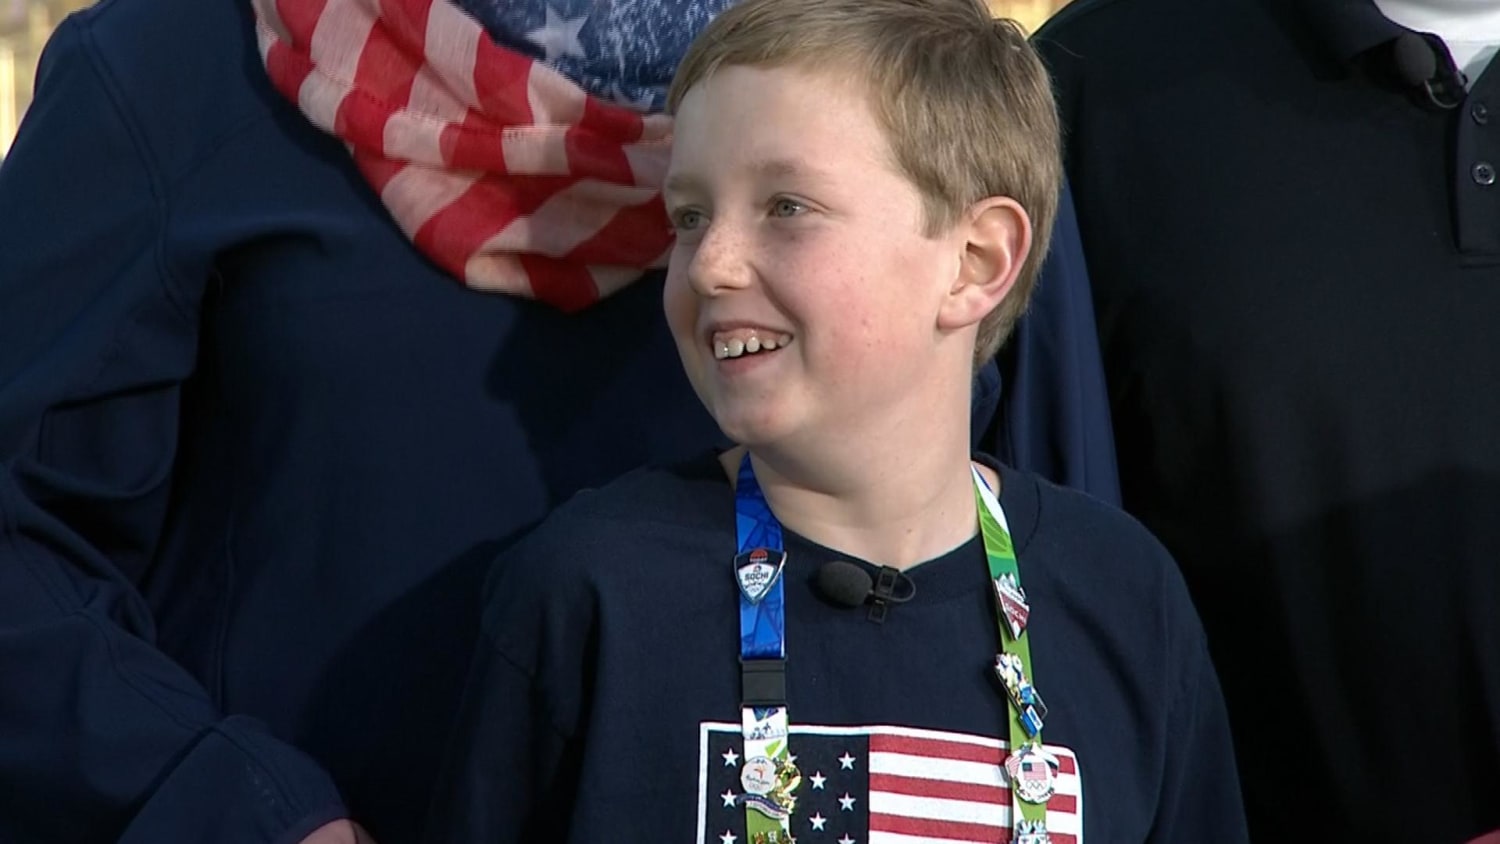 Shaun White meets with Make-A-Wish kids after qualifying runs